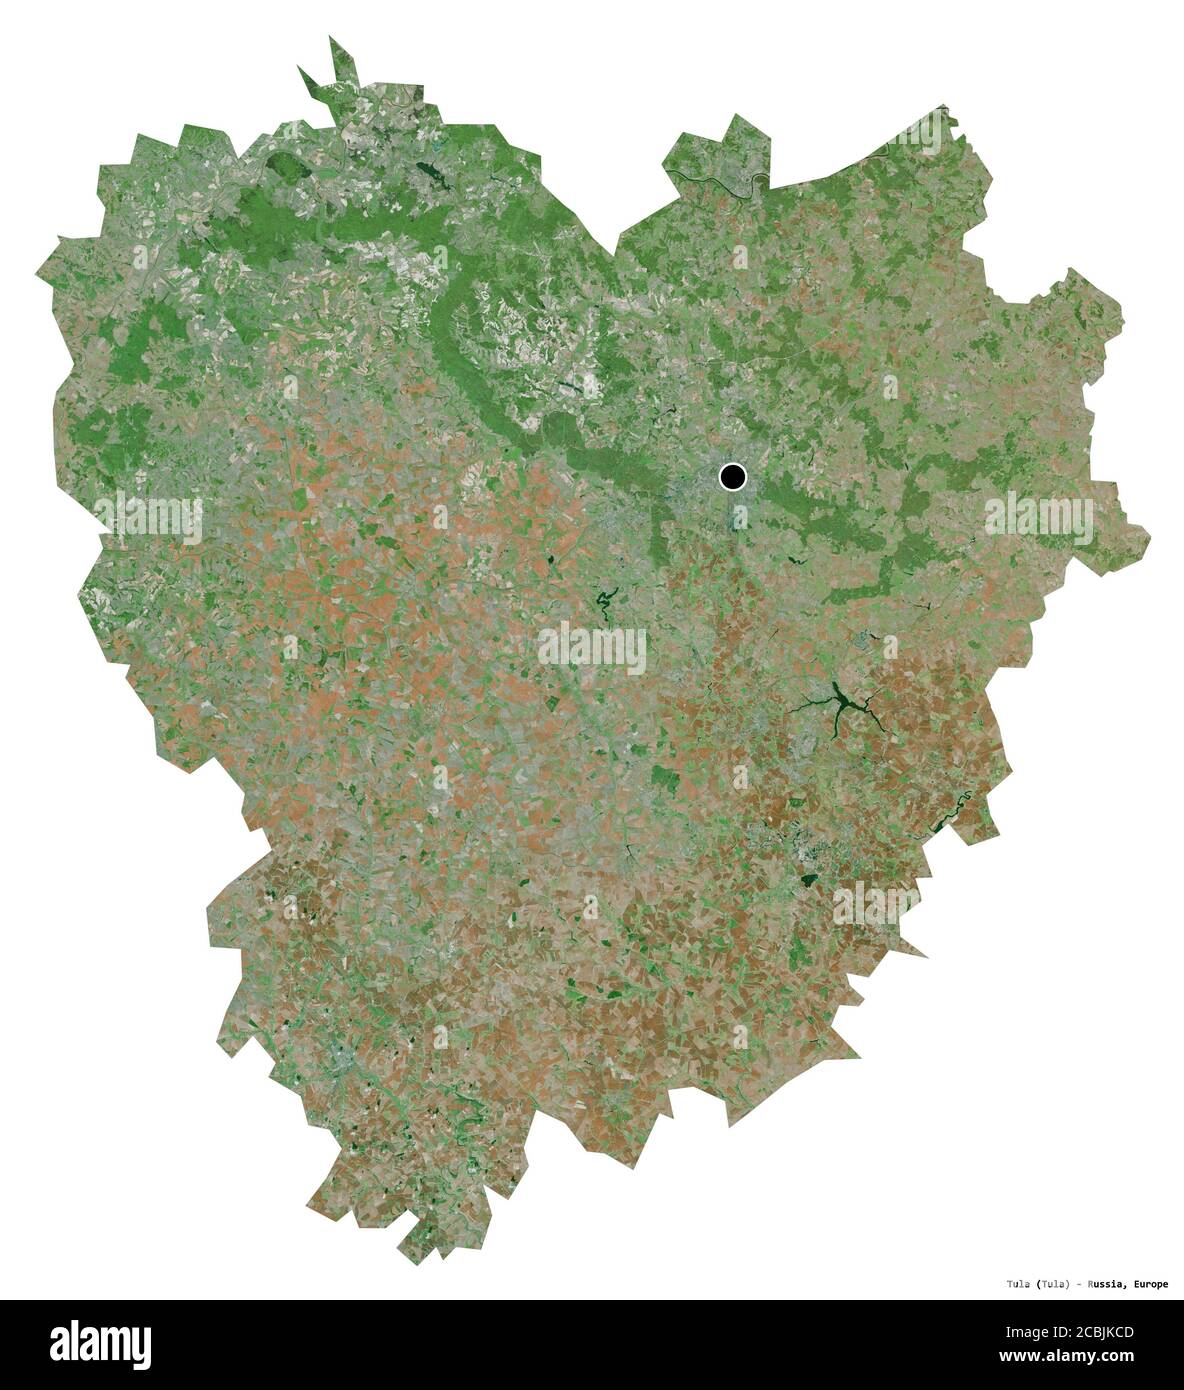 Shape of Tula, region of Russia, with its capital isolated on white background. Satellite imagery. 3D rendering Stock Photo